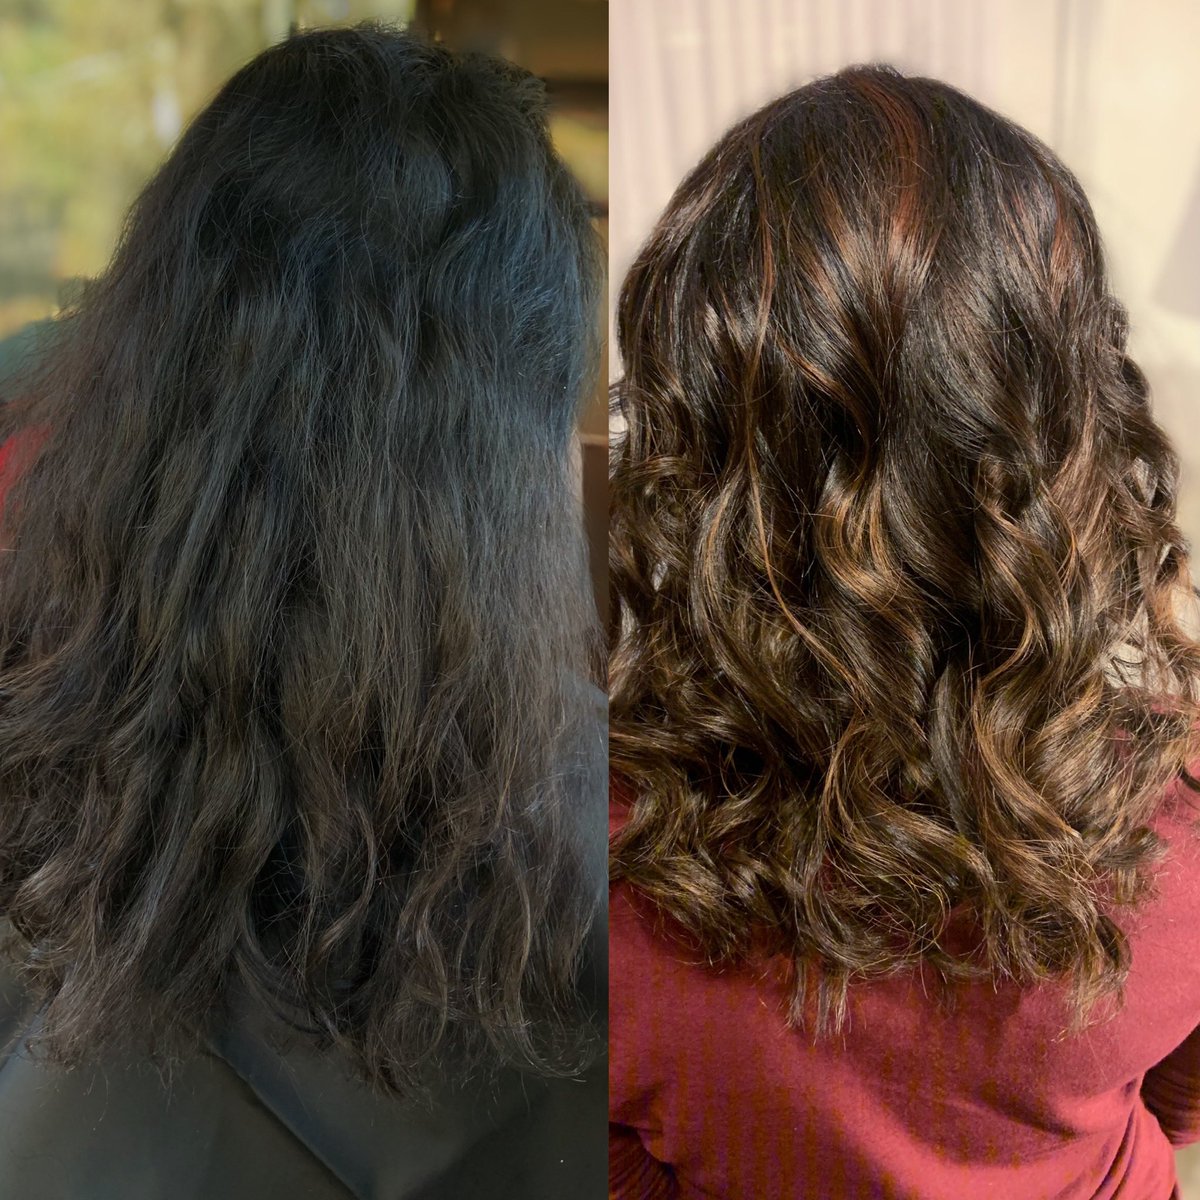 Did my sister’s hair today!!! I’m really proud of how it turned out. 🥰🔥 #hairstylist #hairmagic #balayage #redken #redkencolor #flashlift #shadeseq #cosmetology #cosmetologist #chocolatehair #beachwaves #glowup #beforeandafter